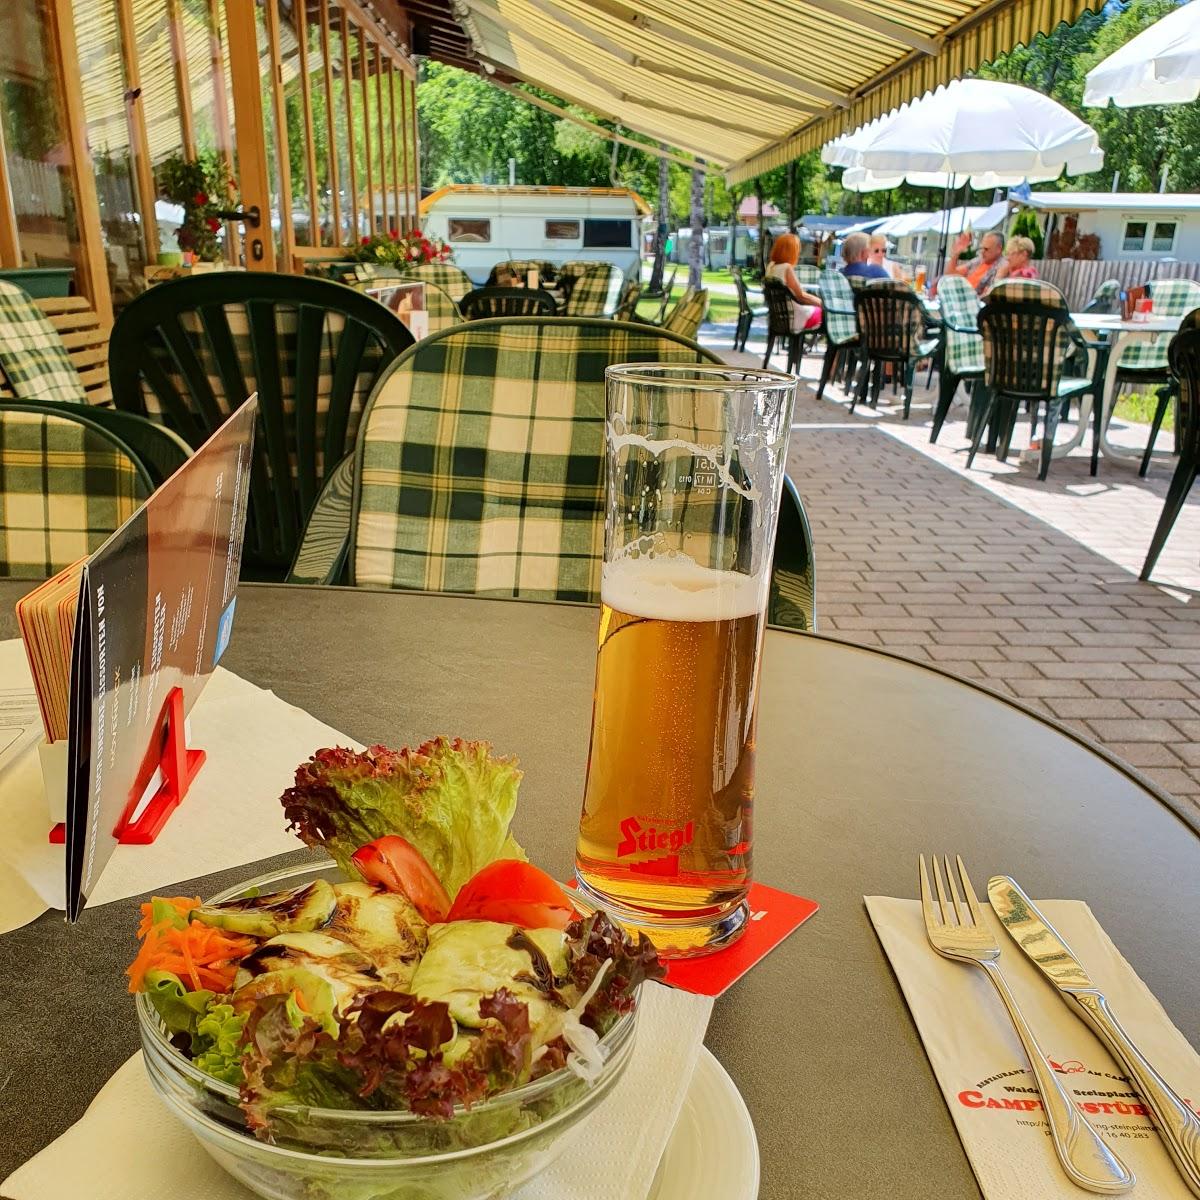 Restaurant "Camping-Stüberl" in Waidring